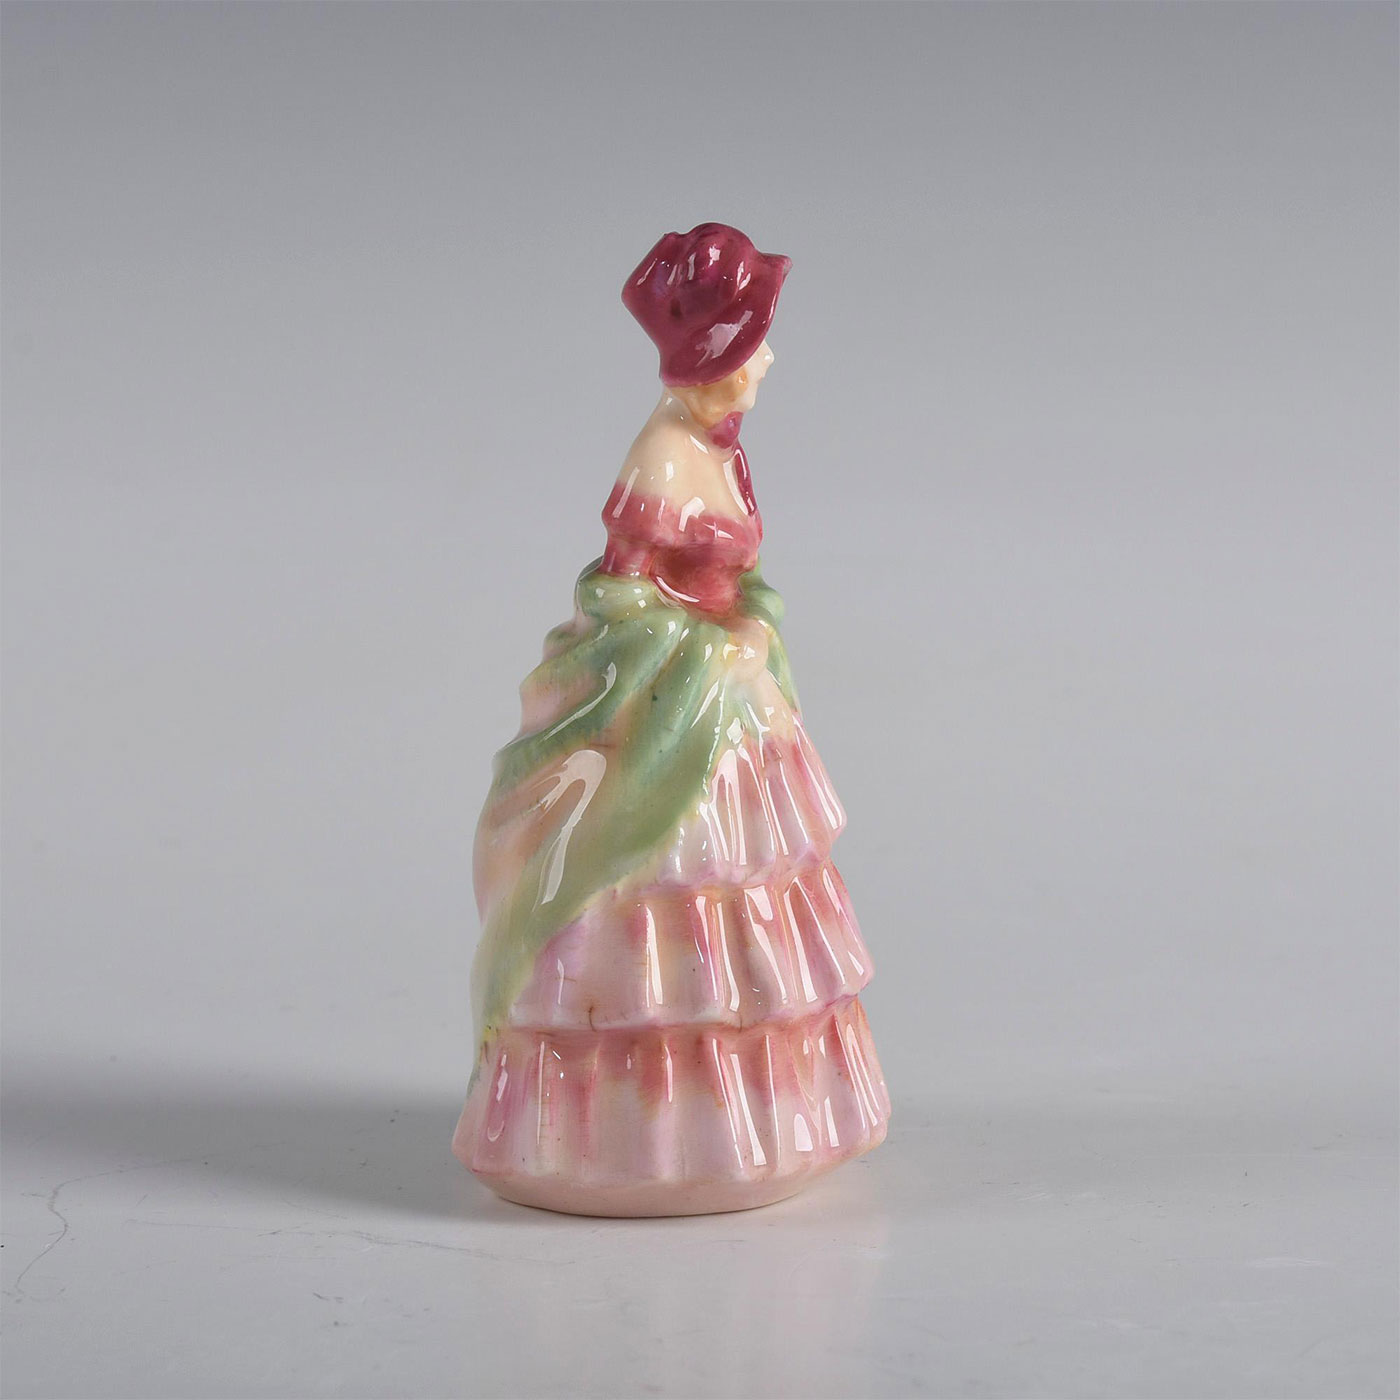 ROYAL DOULTON MINIATURE FIGURINE, VICTORIAN LADY - Image 4 of 5